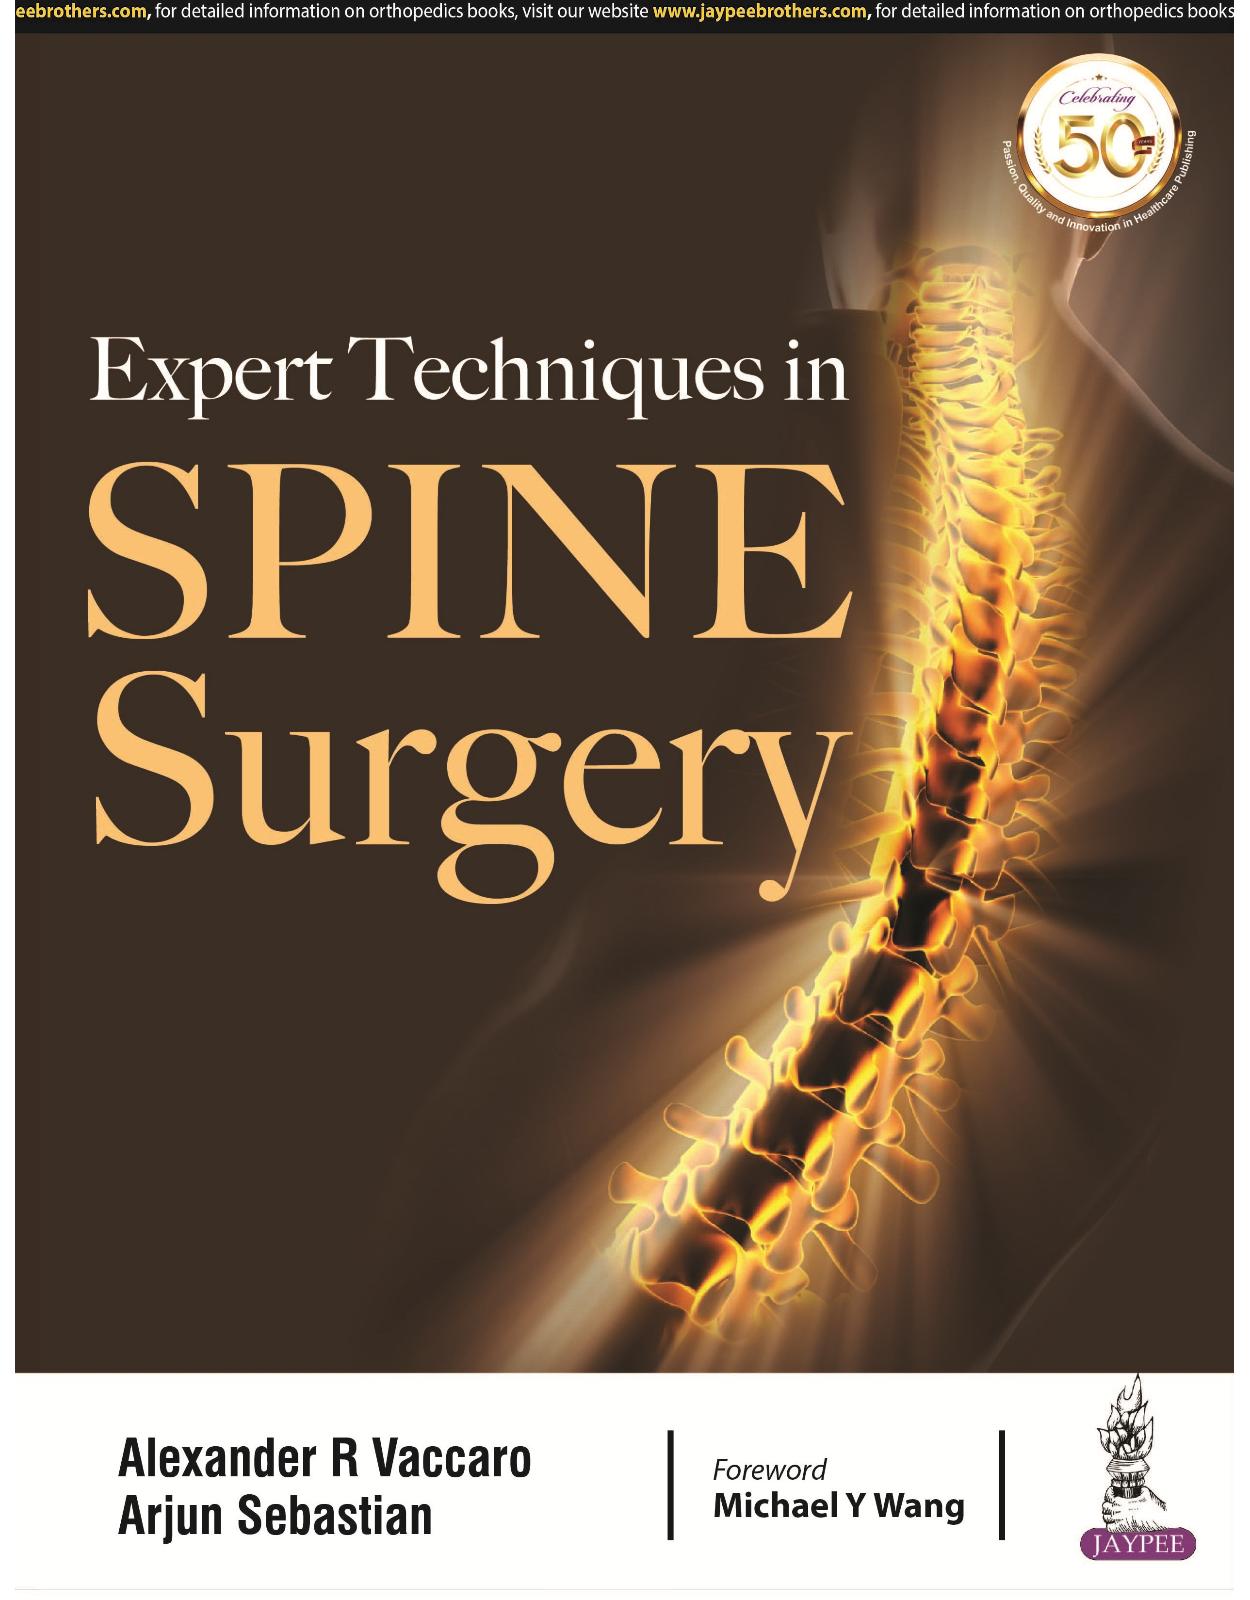 Expert Techniques in Spine Surgery